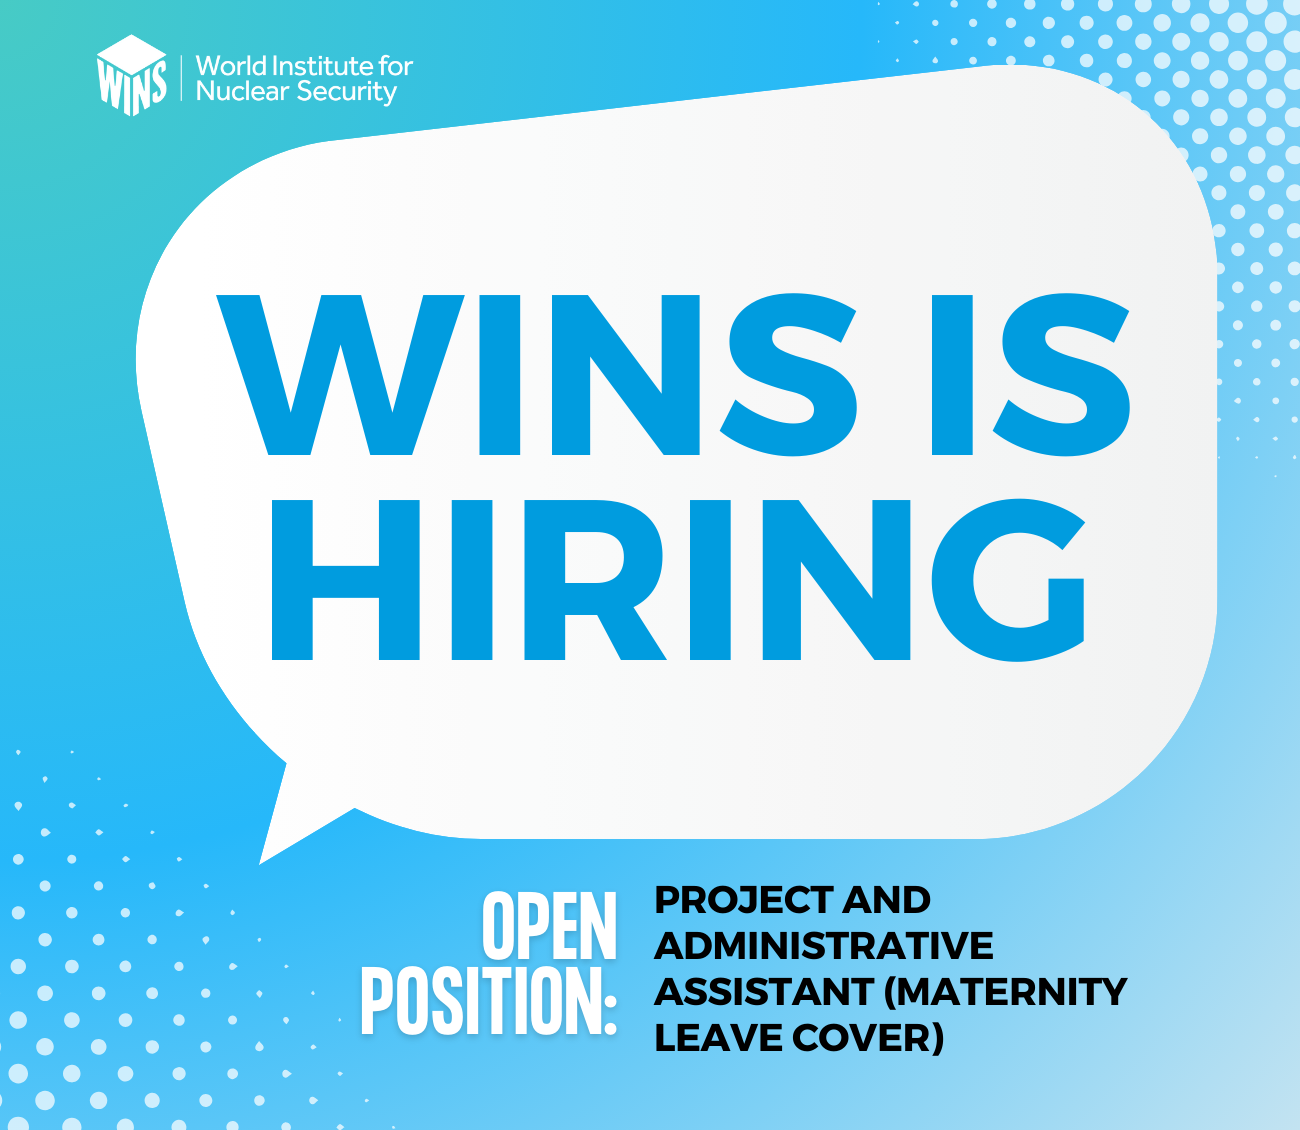 WINS Project and Administrative Assistant (Maternity Leave Cover)